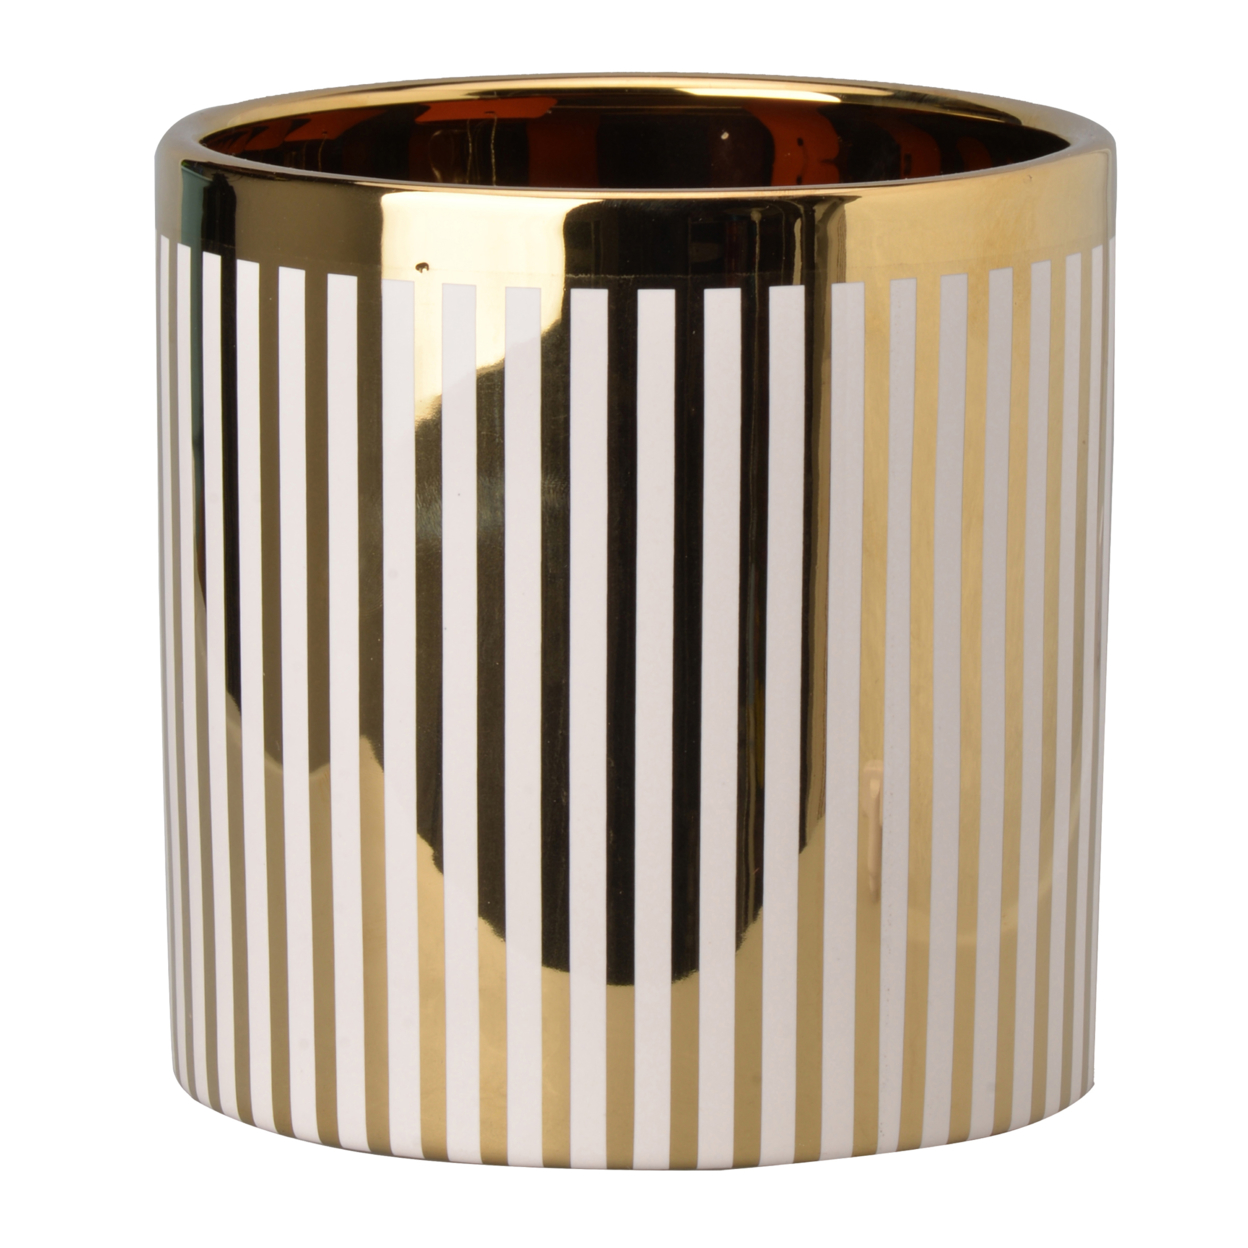 Ceramic Cylindrical Planter With Strips Pattern, White And Gold- Saltoro Sherpi